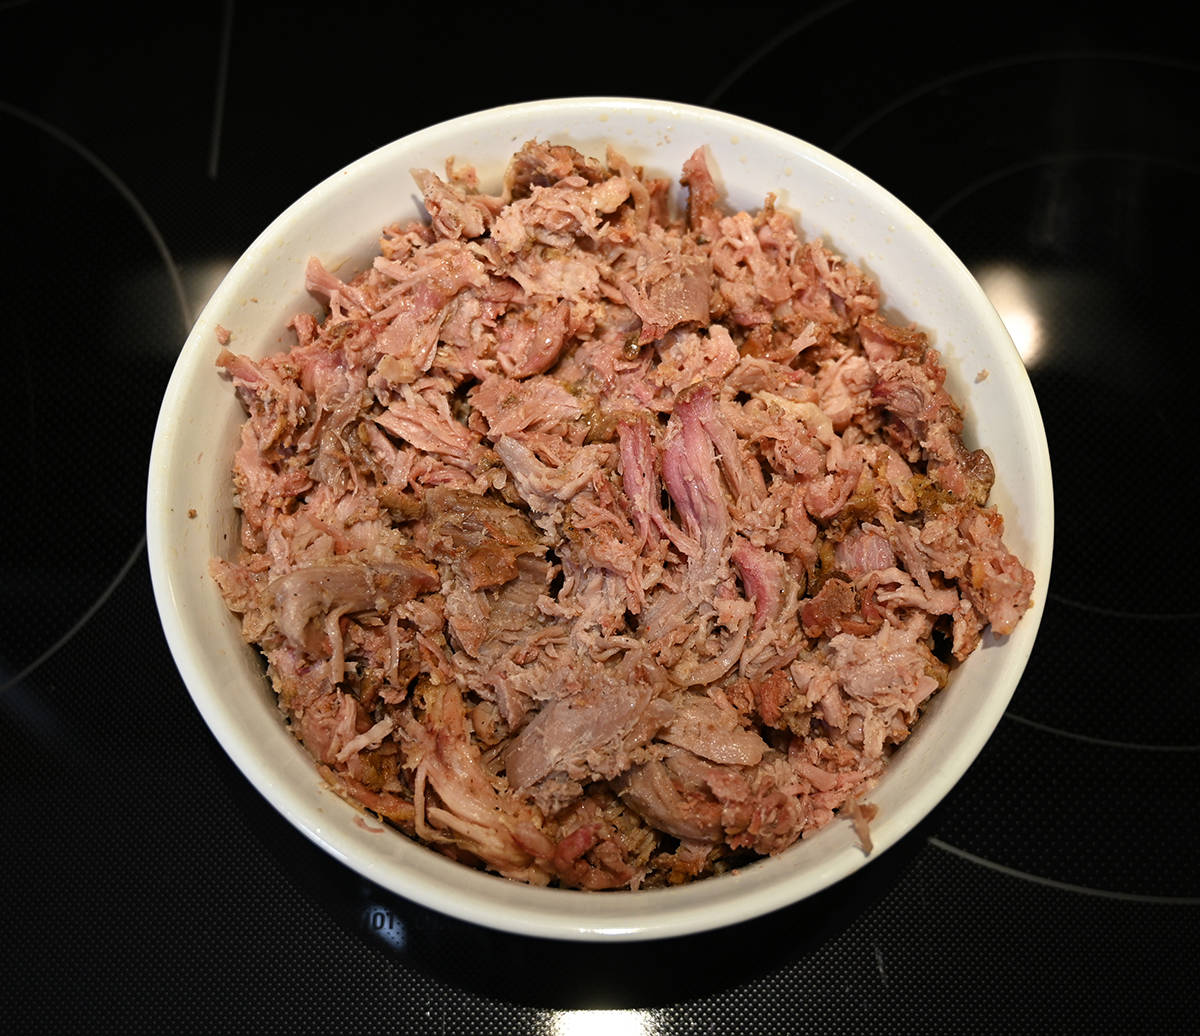 Top down image of the cooked pulled pork in a casserole dish.